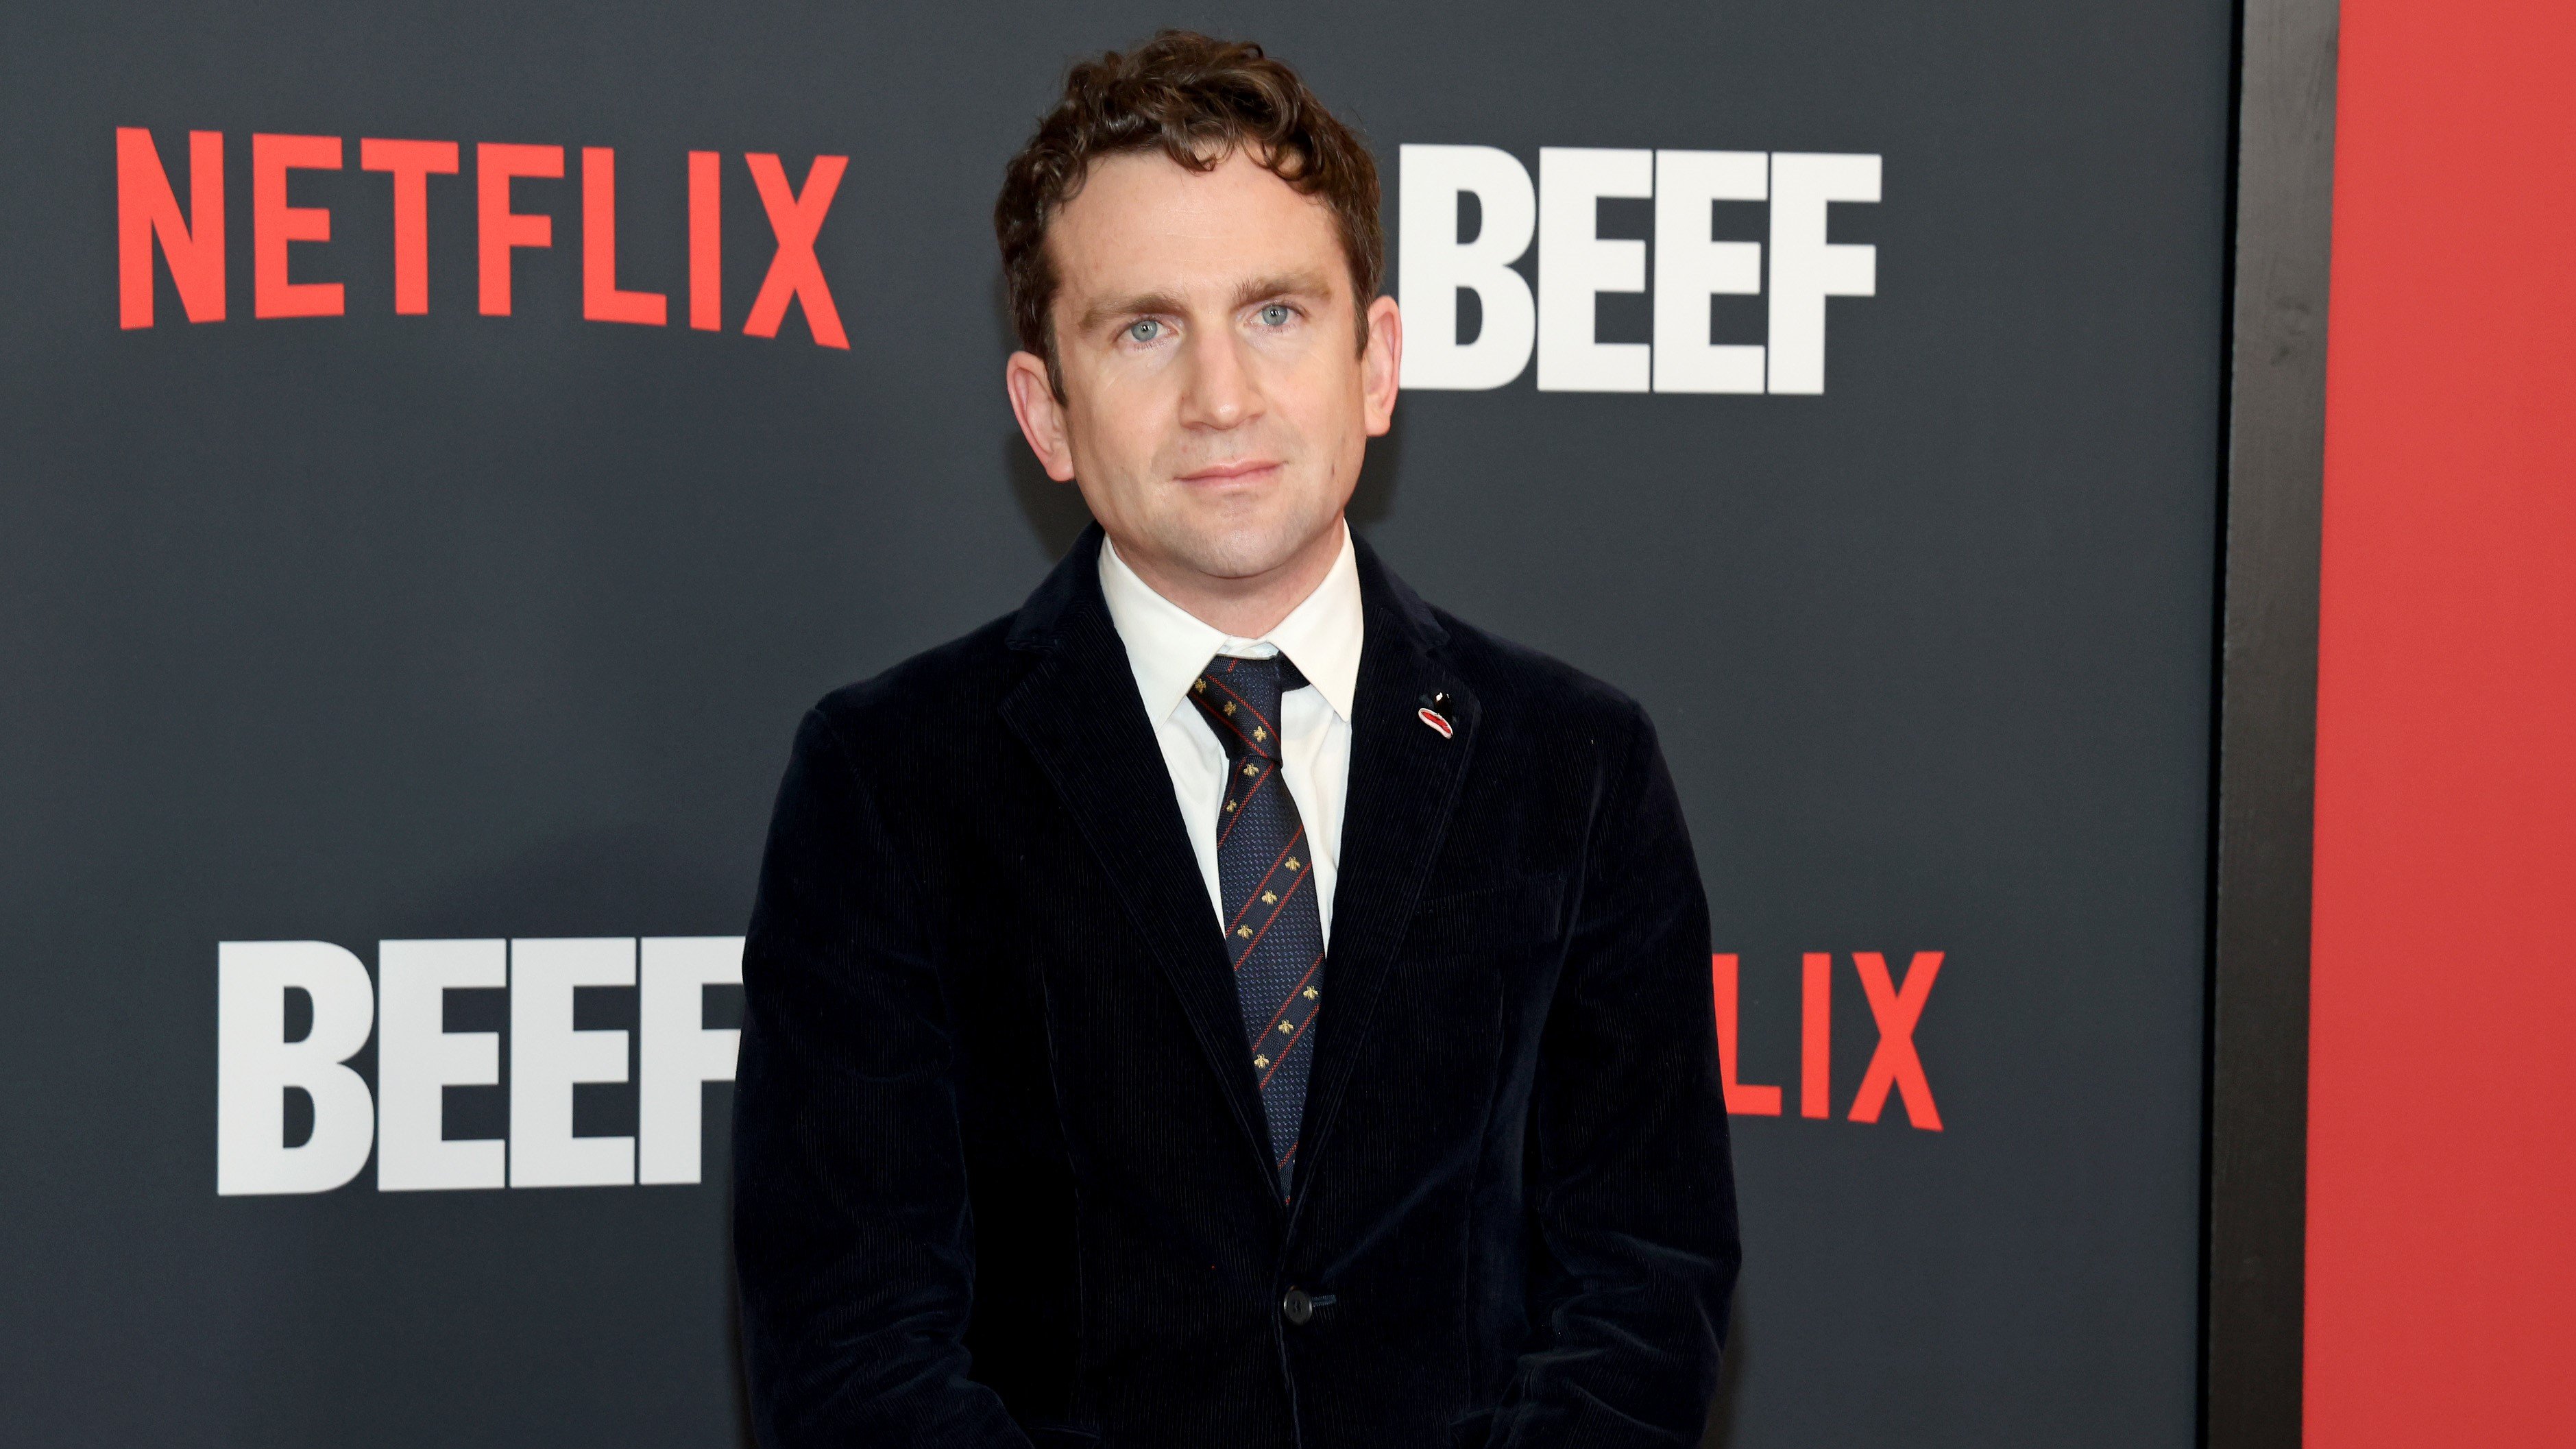 Jake Schreier attends the Los Angeles premiere of Netflix's "BEEF" at TUDUM Theater on March 30, 2023 in Hollywood, California. (Photo by Kayla Oaddams/WireImage)